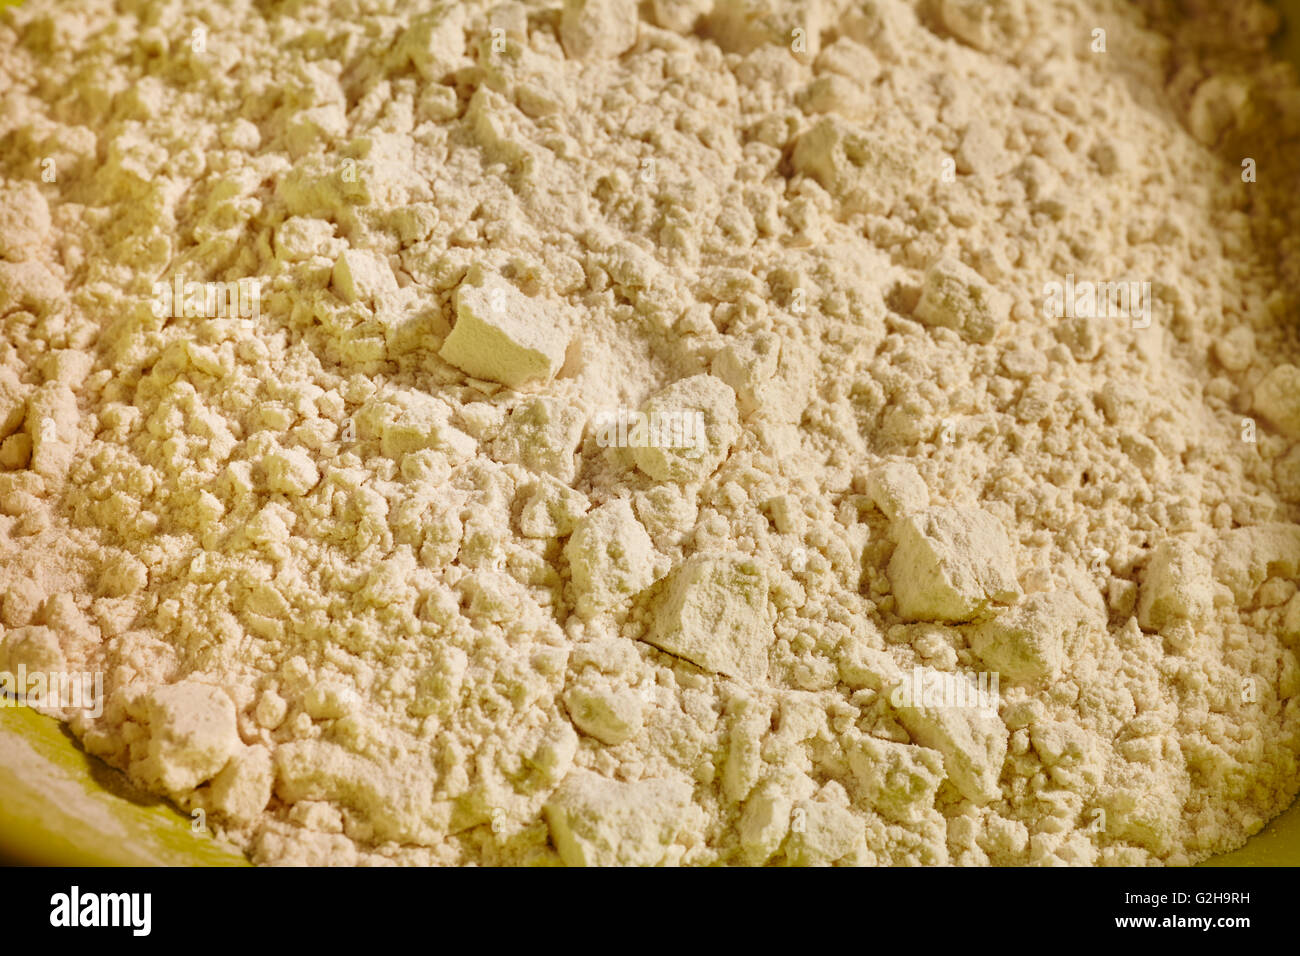 bleached white bread flour, called 'strong' flour in the UK Stock Photo